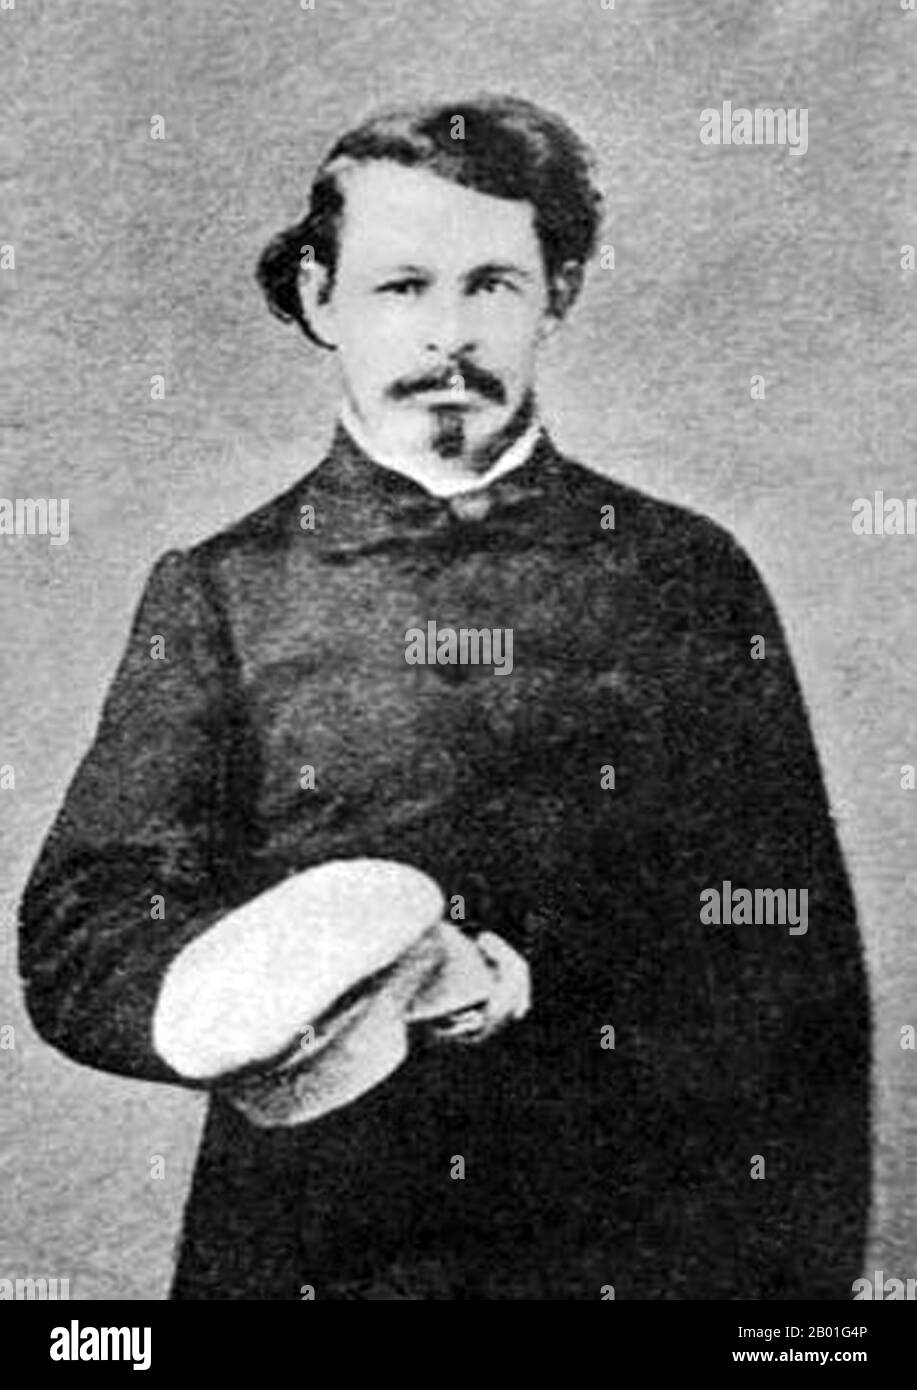 China/USA: Frederick Townsend Ward (29 November 1831 - 21 September 1862), American sailor, mercenary and soldier of fortune famous for his military victories for Imperial China during the Taiping Rebellion, 1861.  Frederick Townsend Ward was born in Salem, Massachusetts. Aside from working as a sailor during the 1850s, Ward found employment, as a 'filibuster'. 'Filibustering' is 'raising private mercenary armies and leading them into other countries to advance either [one's own] schemes or those of wealthy sponsors'. Stock Photo